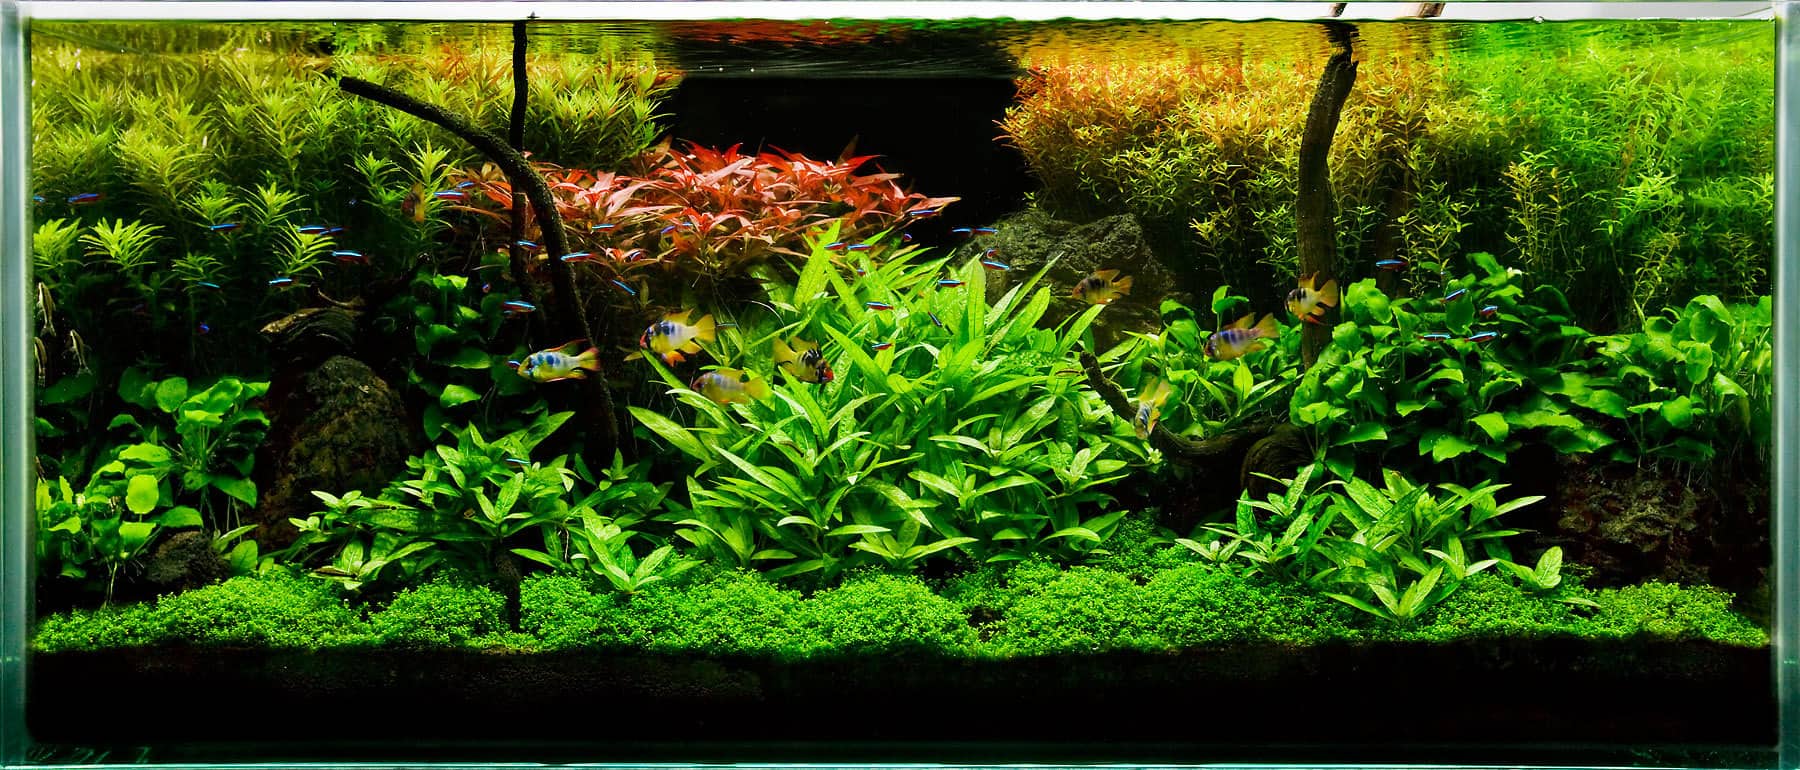 The Key To A Successful Planted Fish Tank Aquarium - Tropical Fish Site